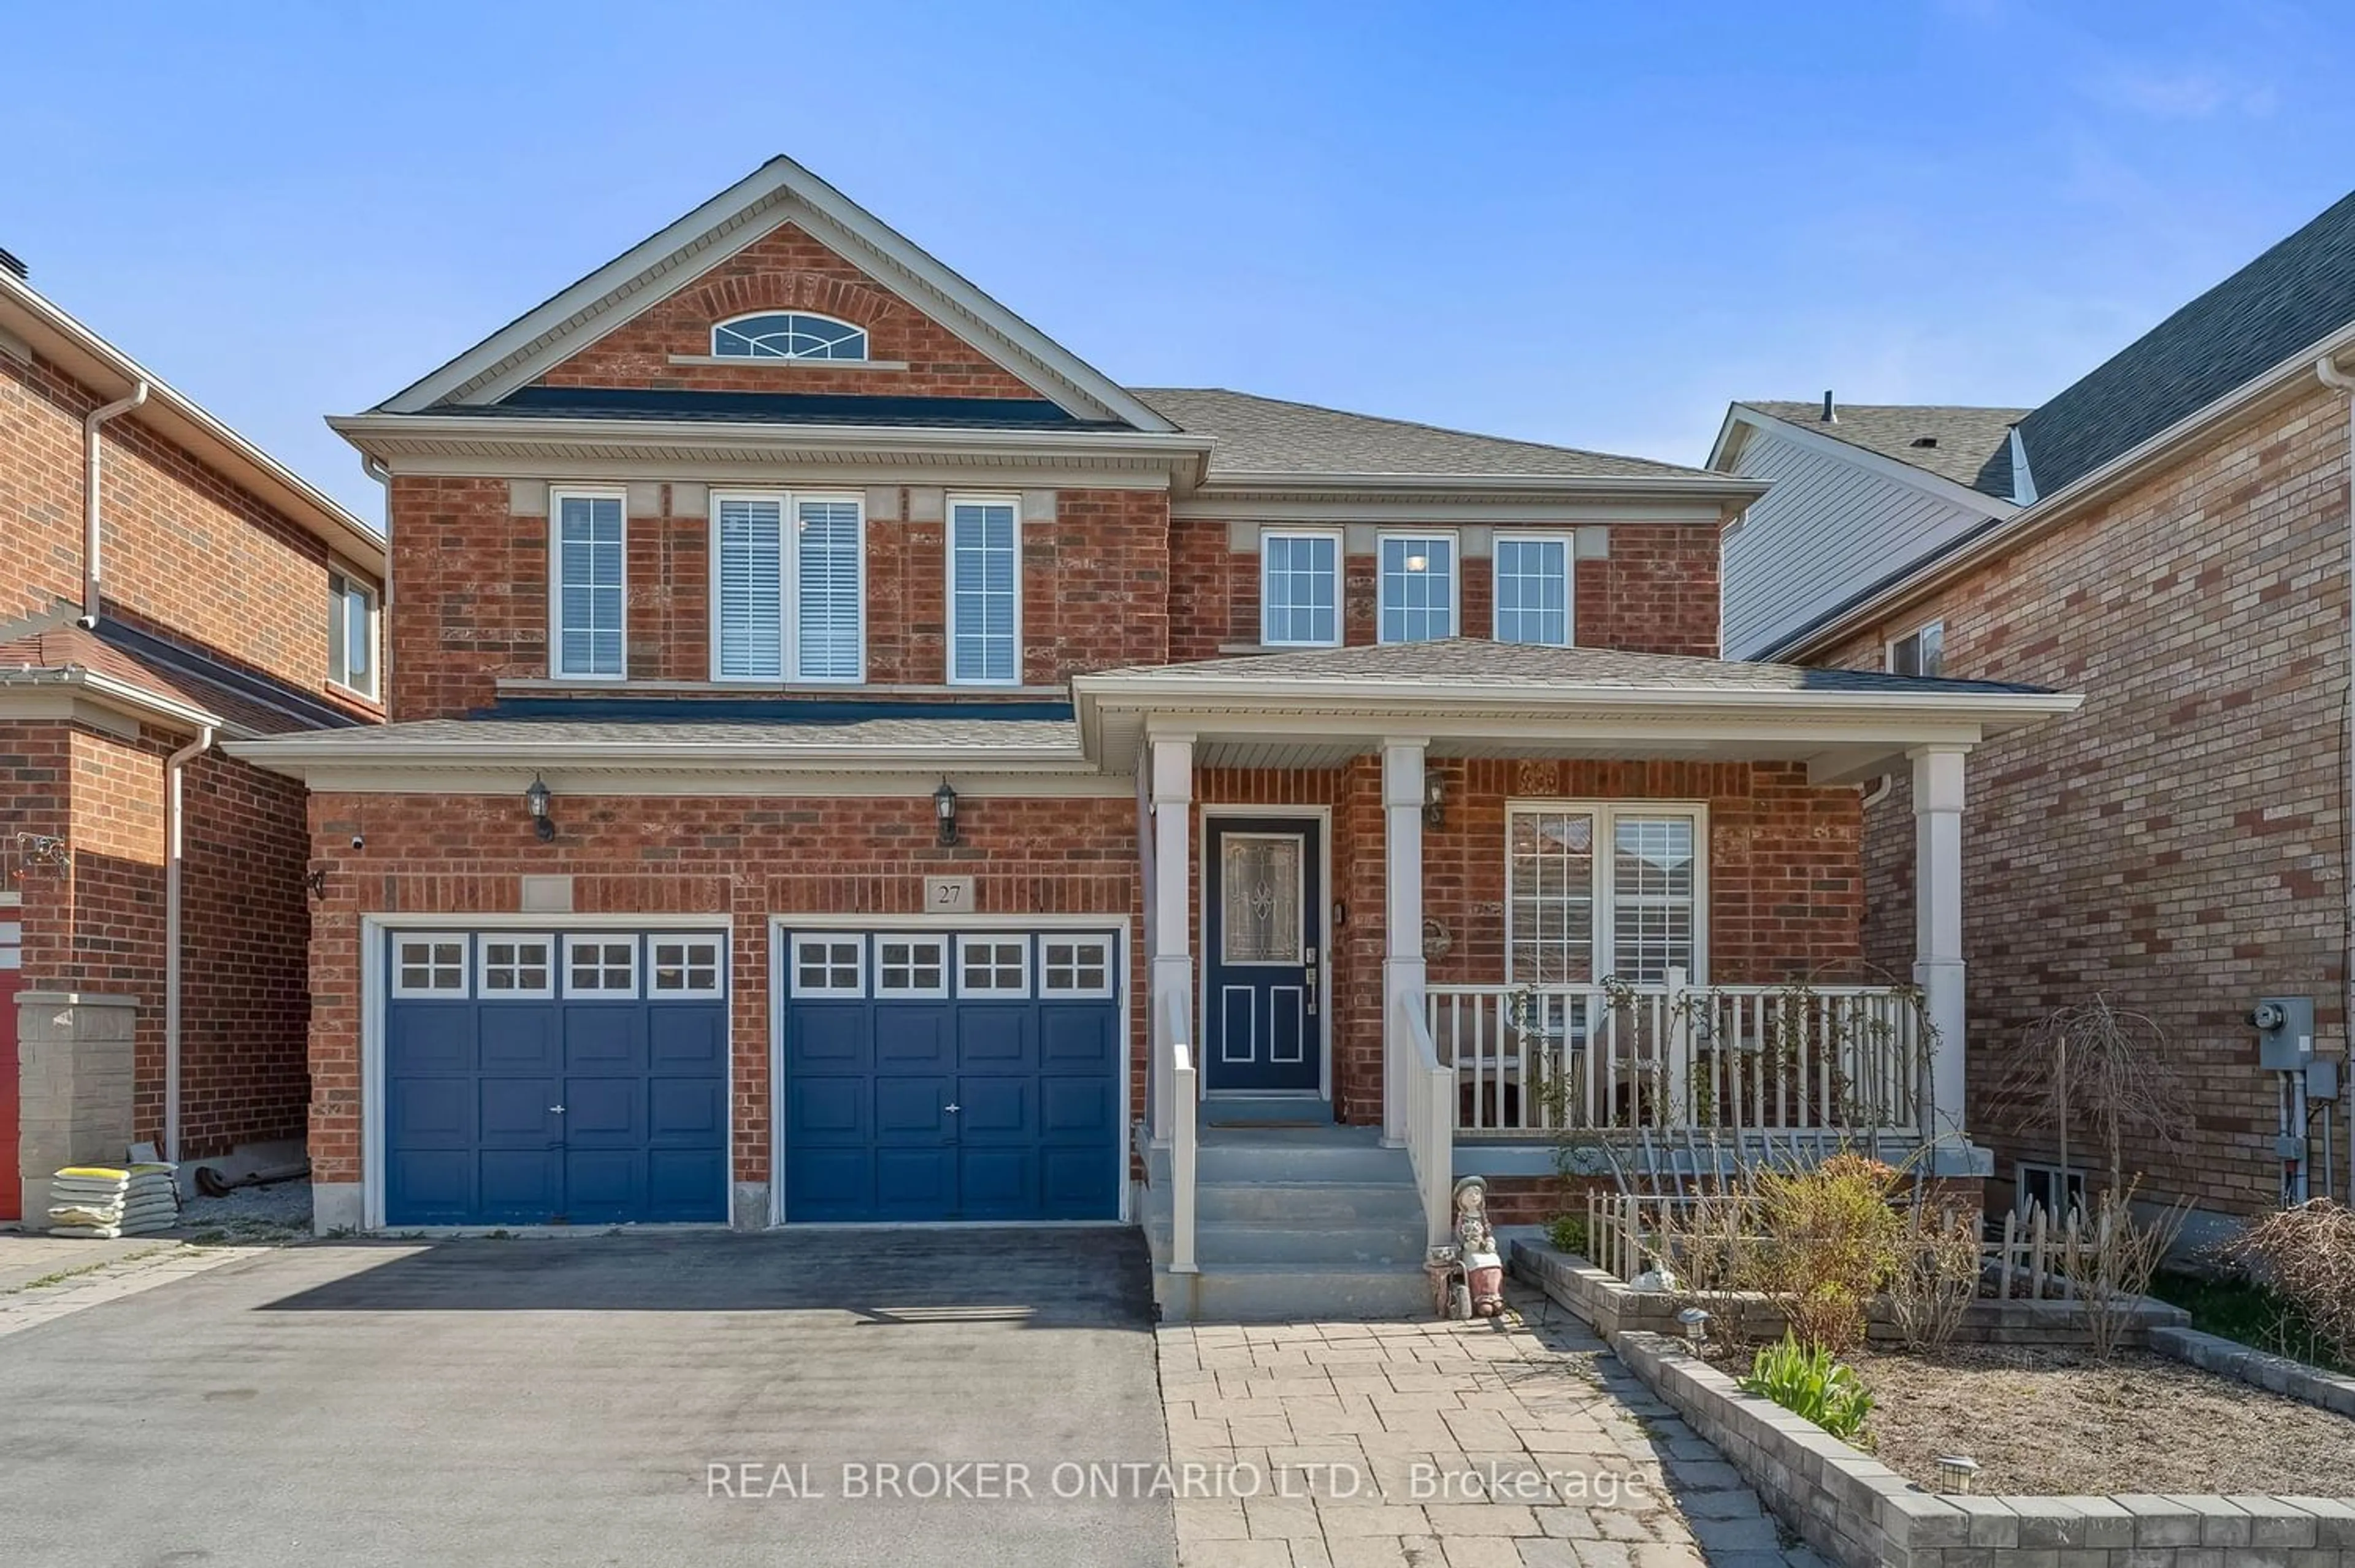 Home with brick exterior material for 27 Taverner Cres, Ajax Ontario L1T 5A3